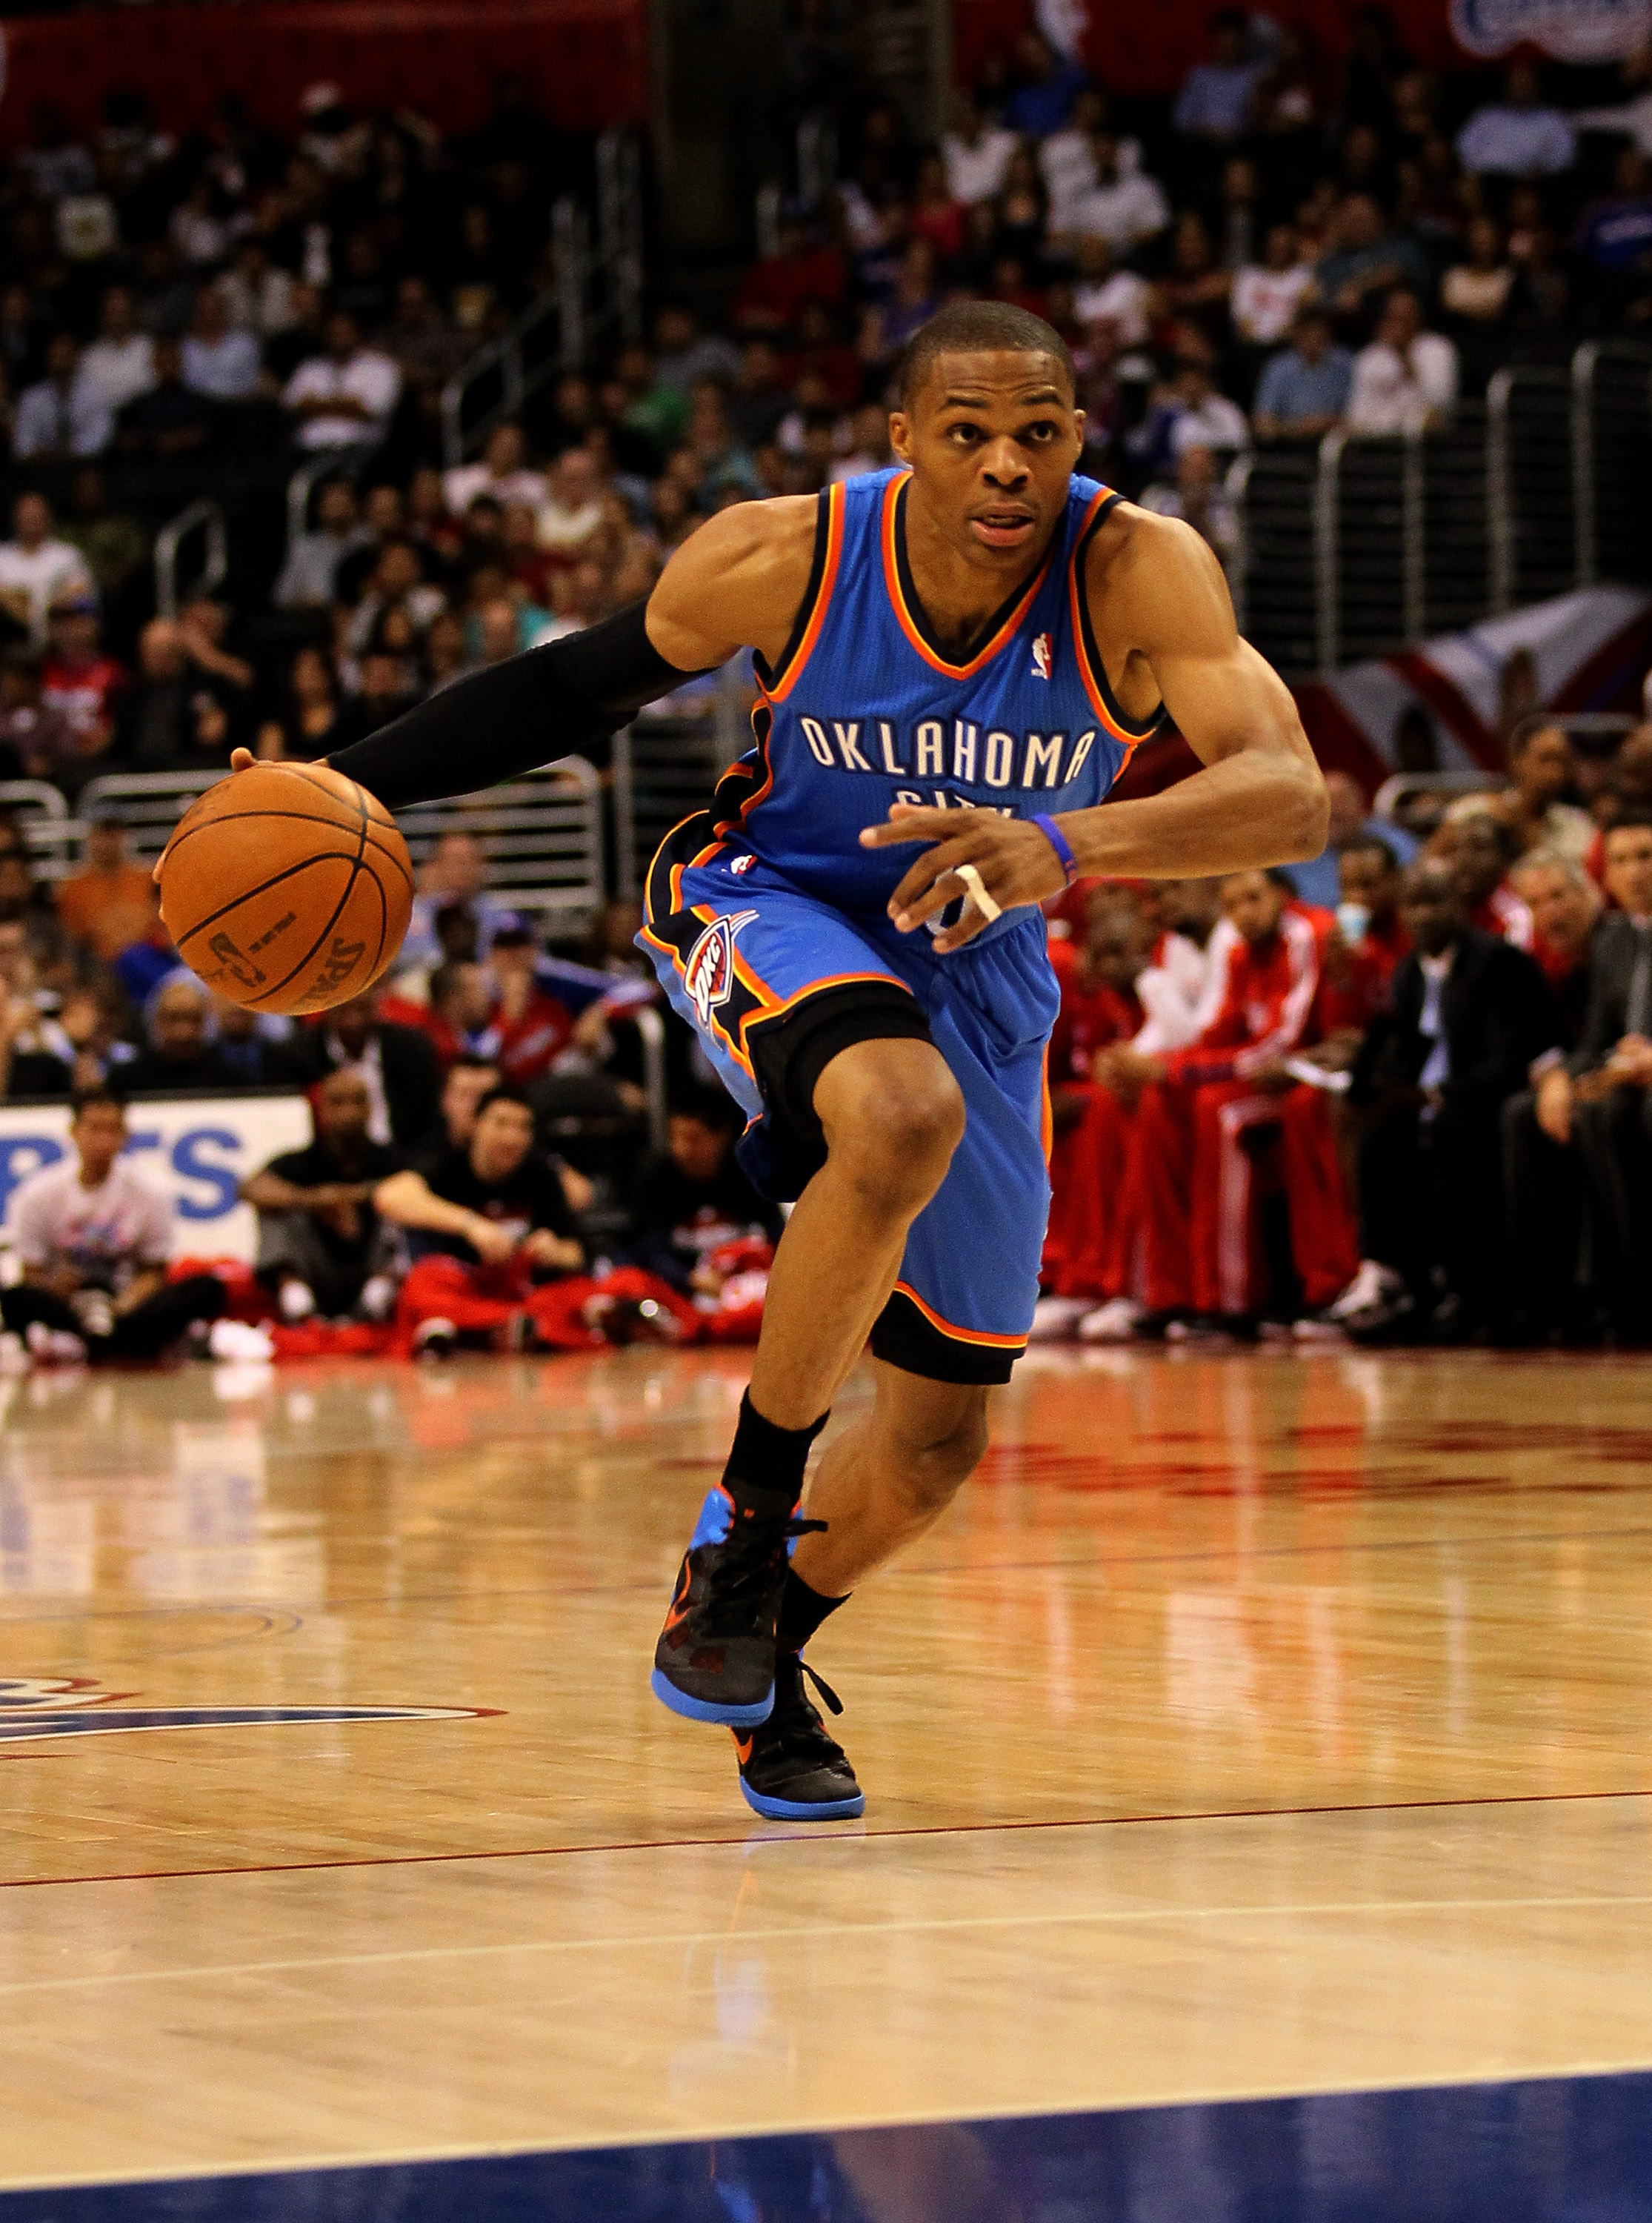 Russell Westbrook is known for his "Cat" like quickness and slashing ability